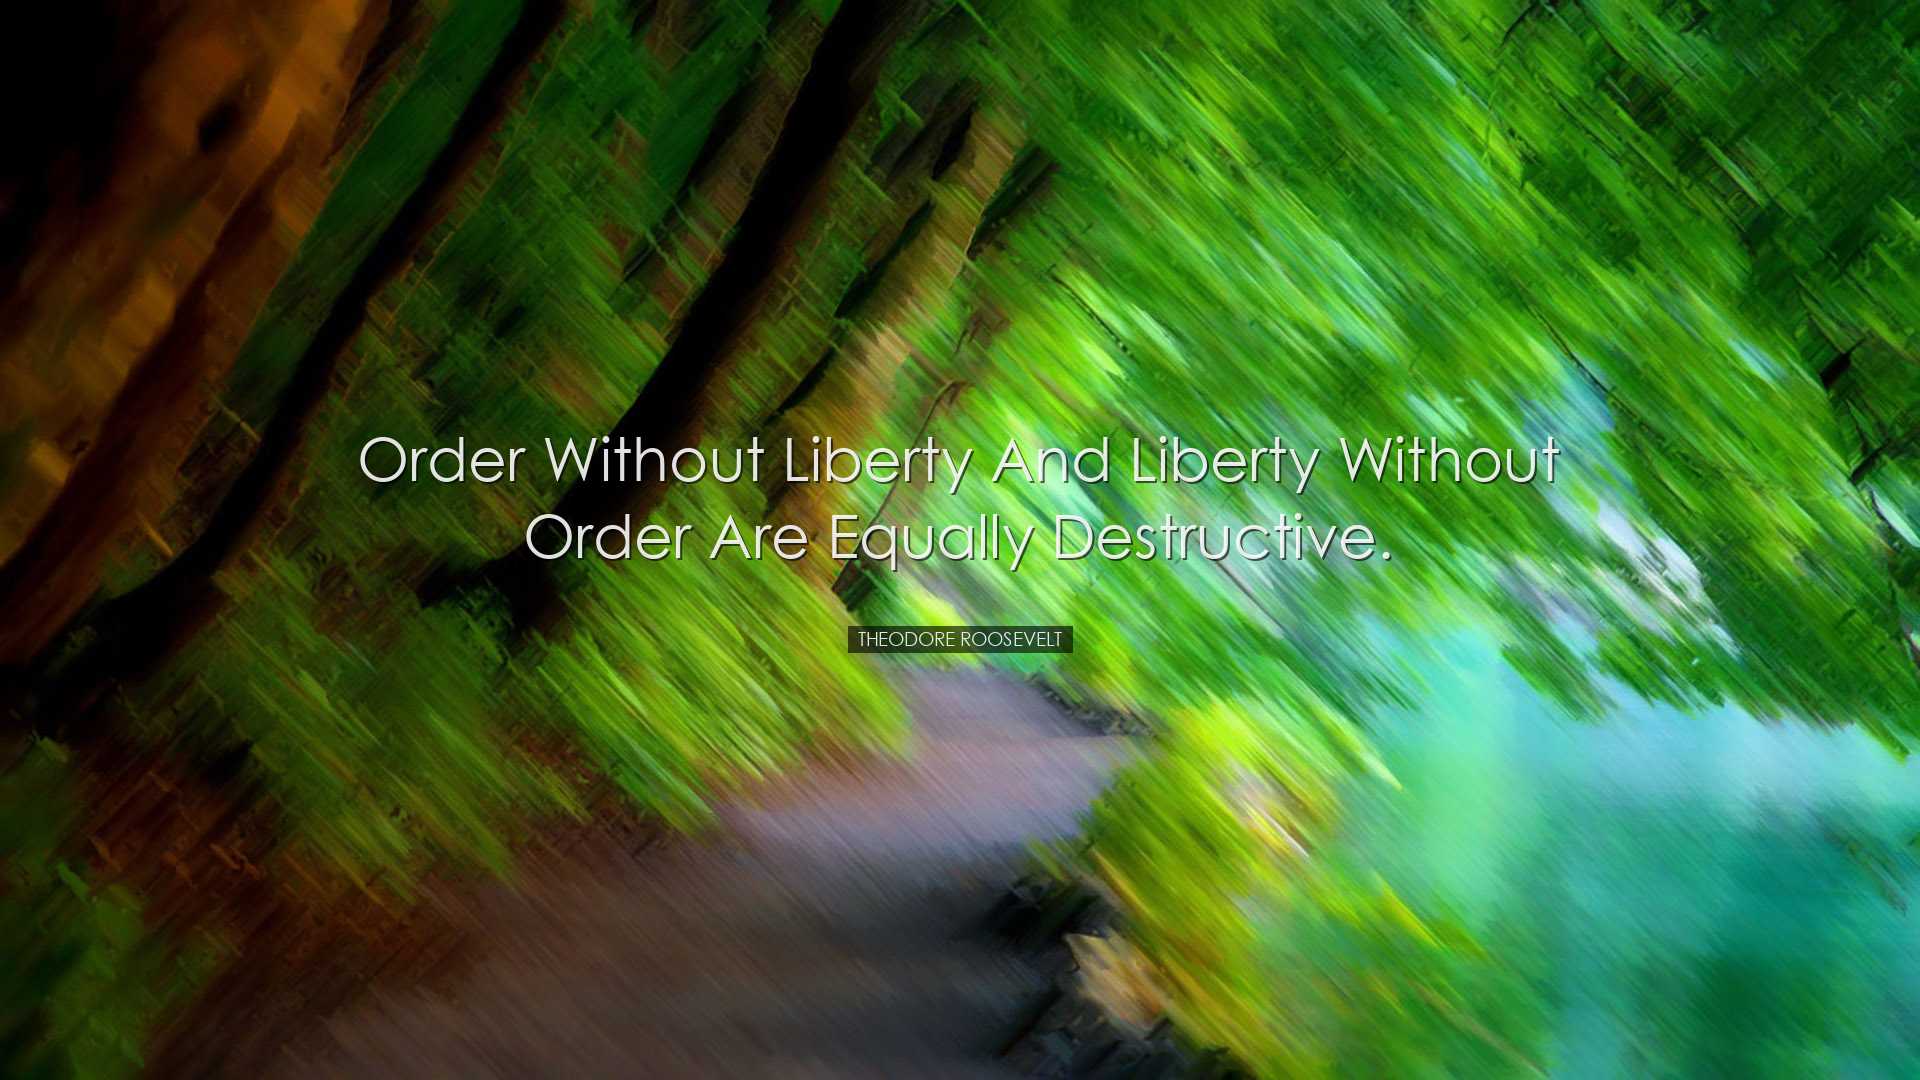 Order without liberty and liberty without order are equally destru